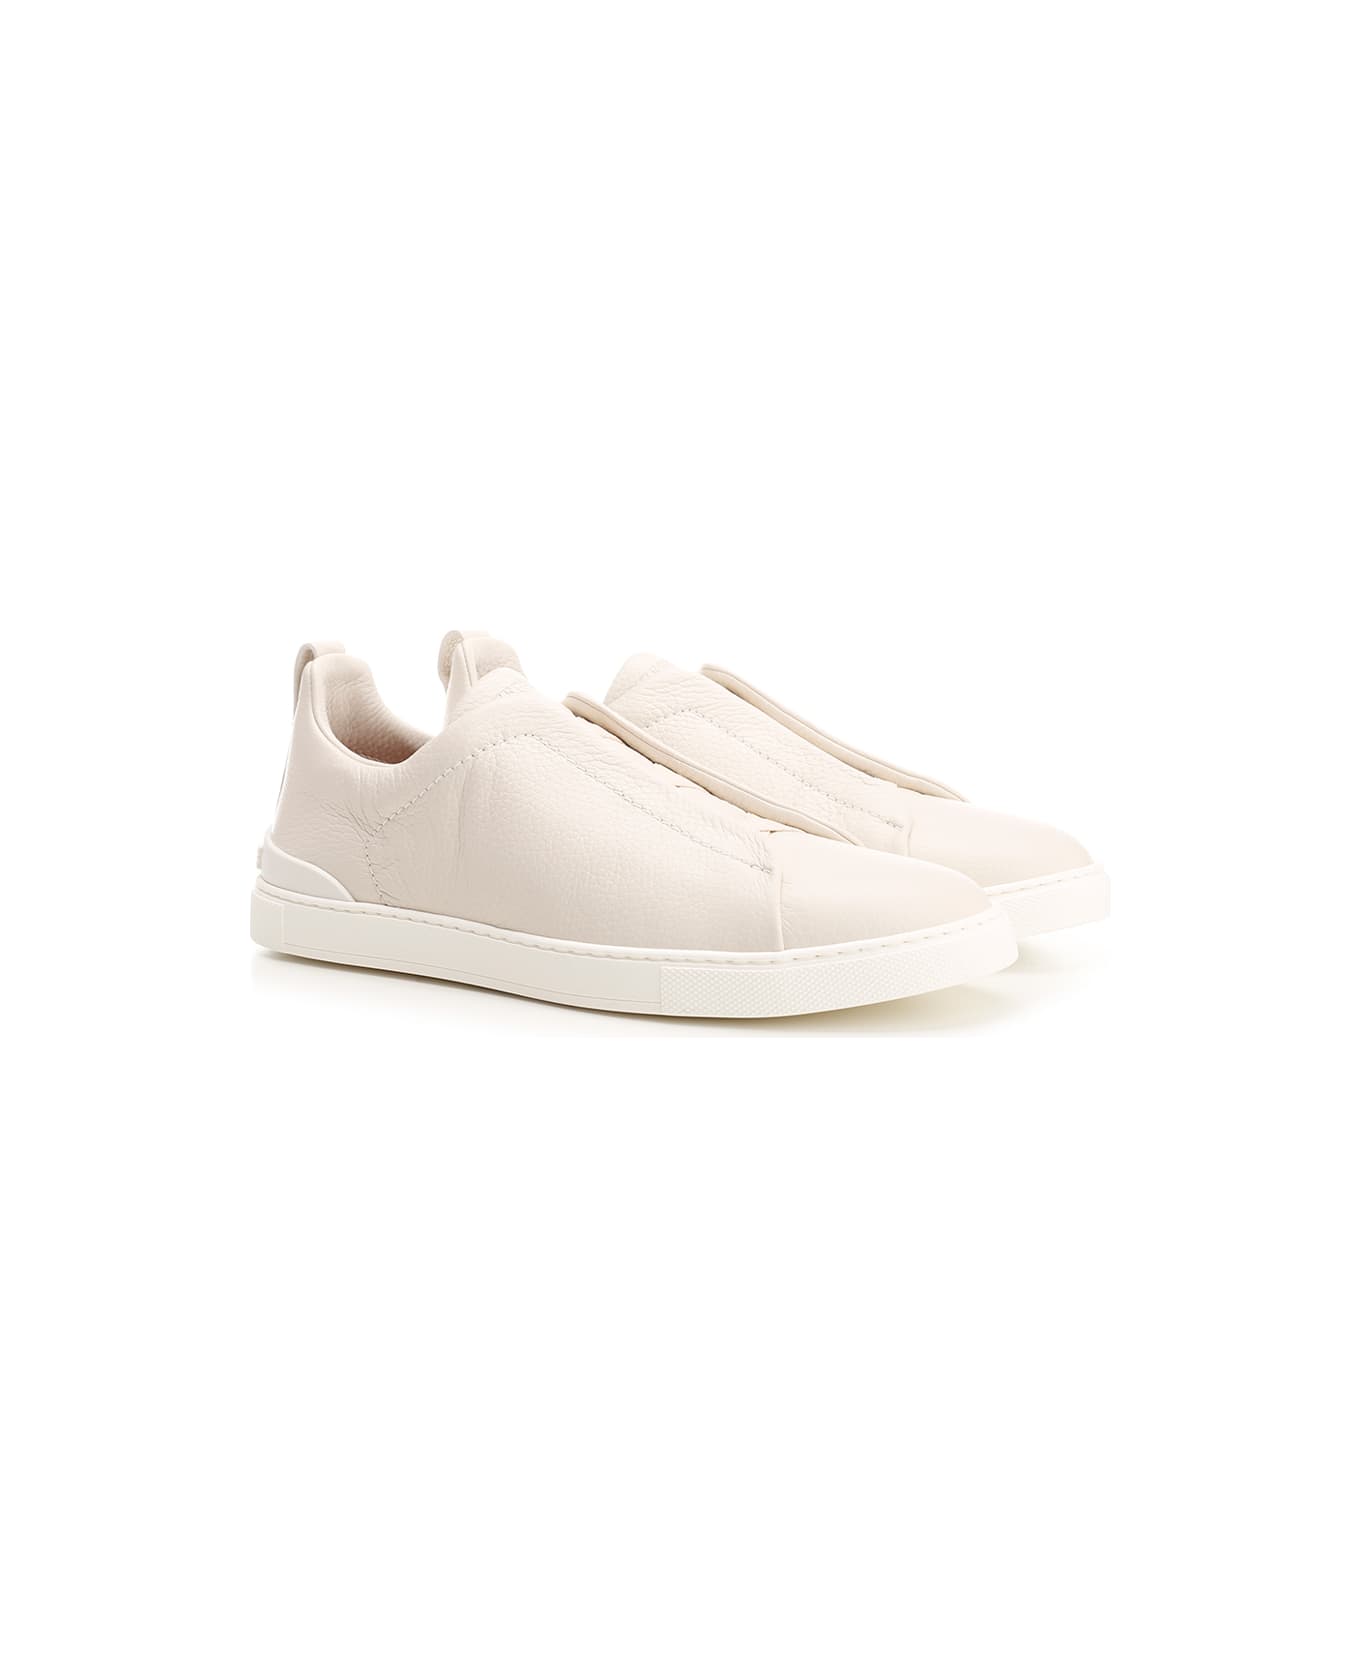 Zegna 'triple Stitch' Low Top Sneakers - White